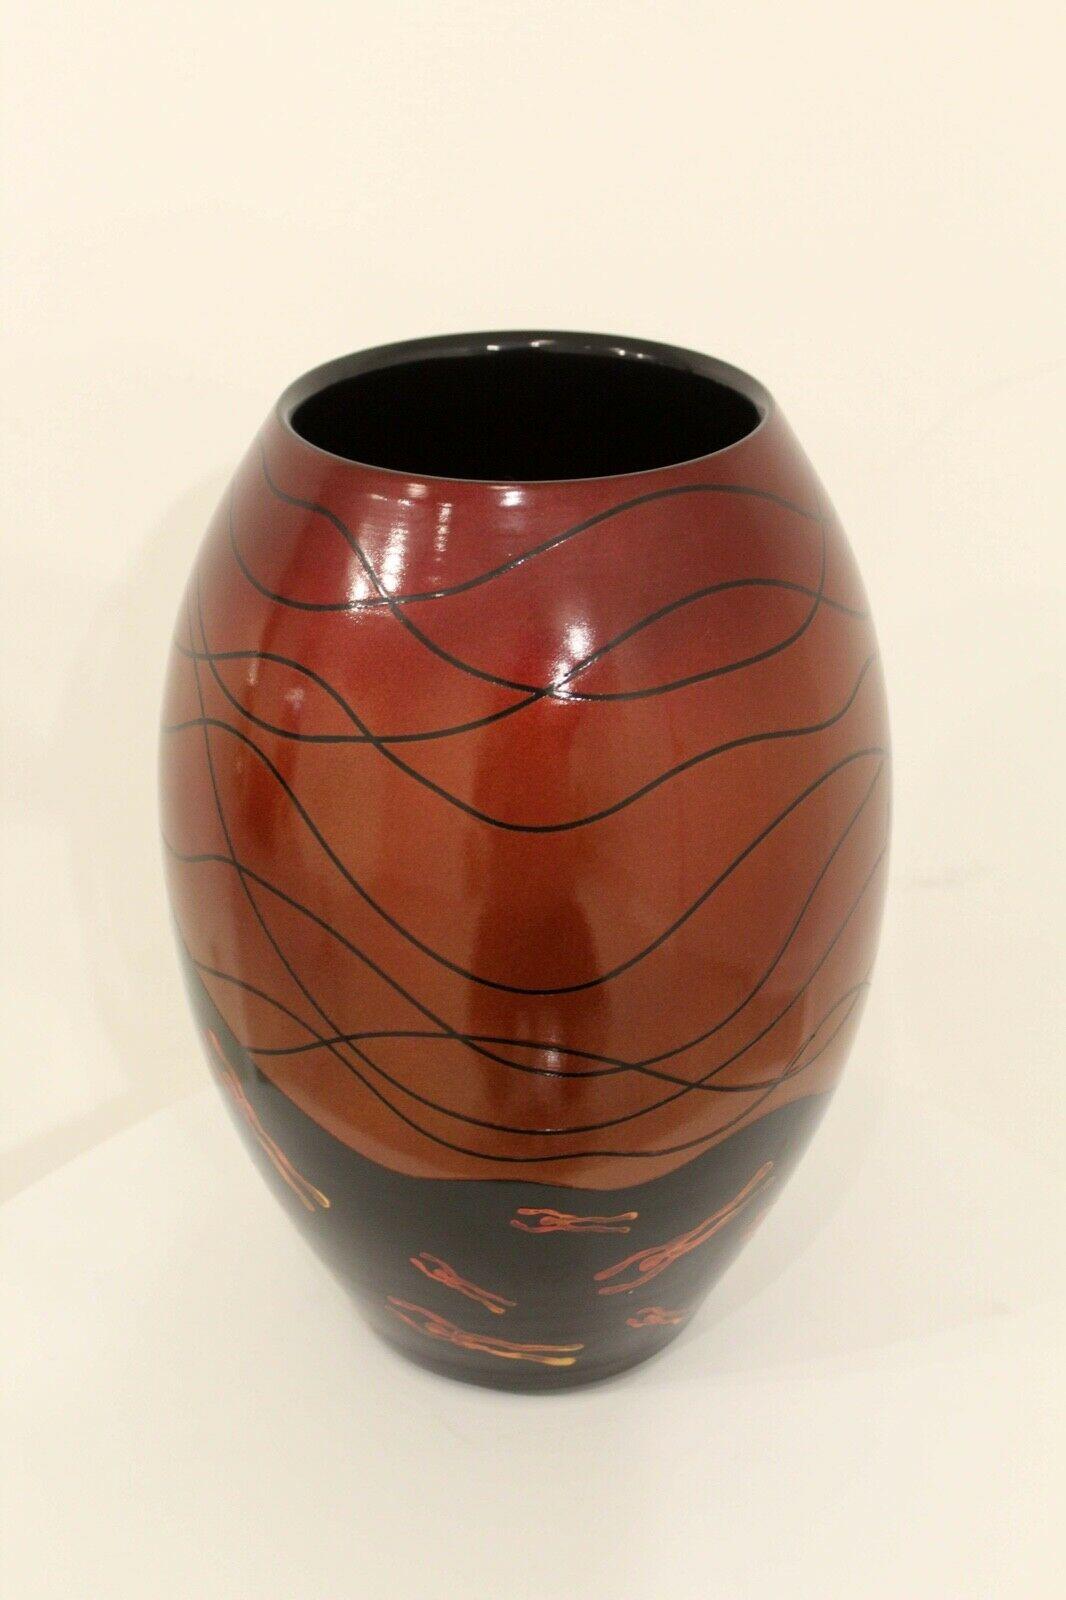 For your consideration is a large vessel depicting figurative Native American motif of water is glazed in a high gloss black and copper finish with a slight iridescence. Signed on bottom.

Dimensions: 9 diameter x 12.75 height.